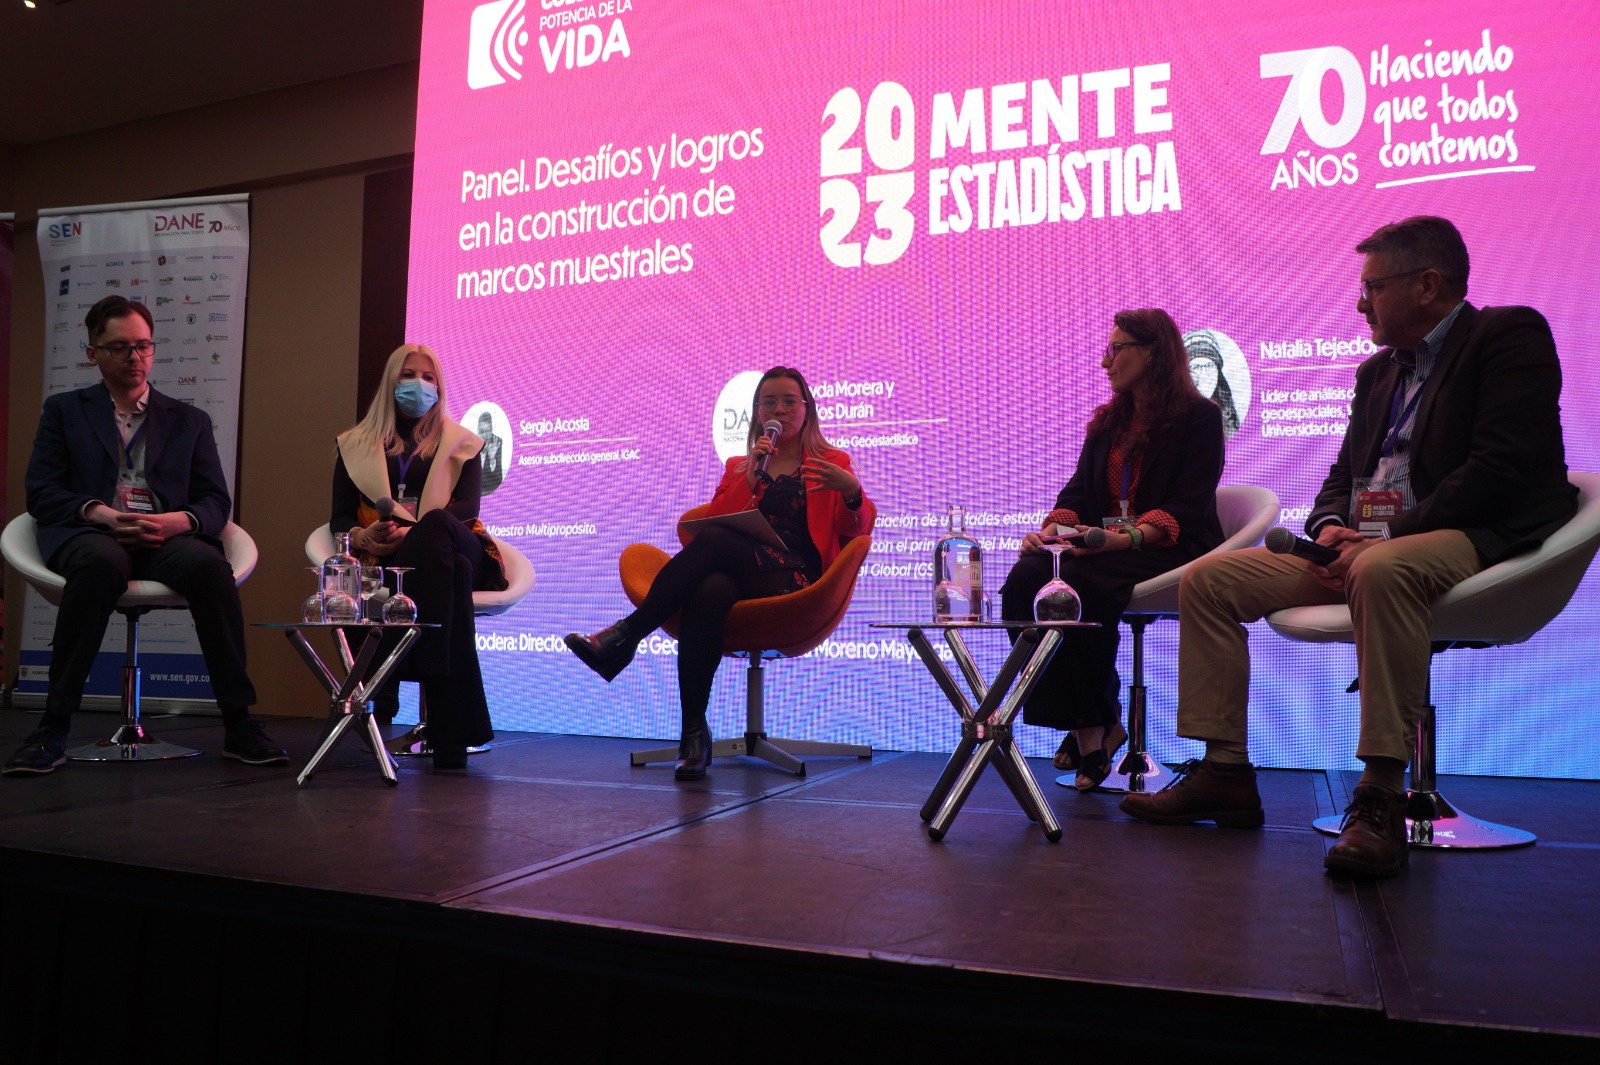 Dr Tejedor-Garavito taking part in a panel at “Statistical Mind: 70 making us all count".